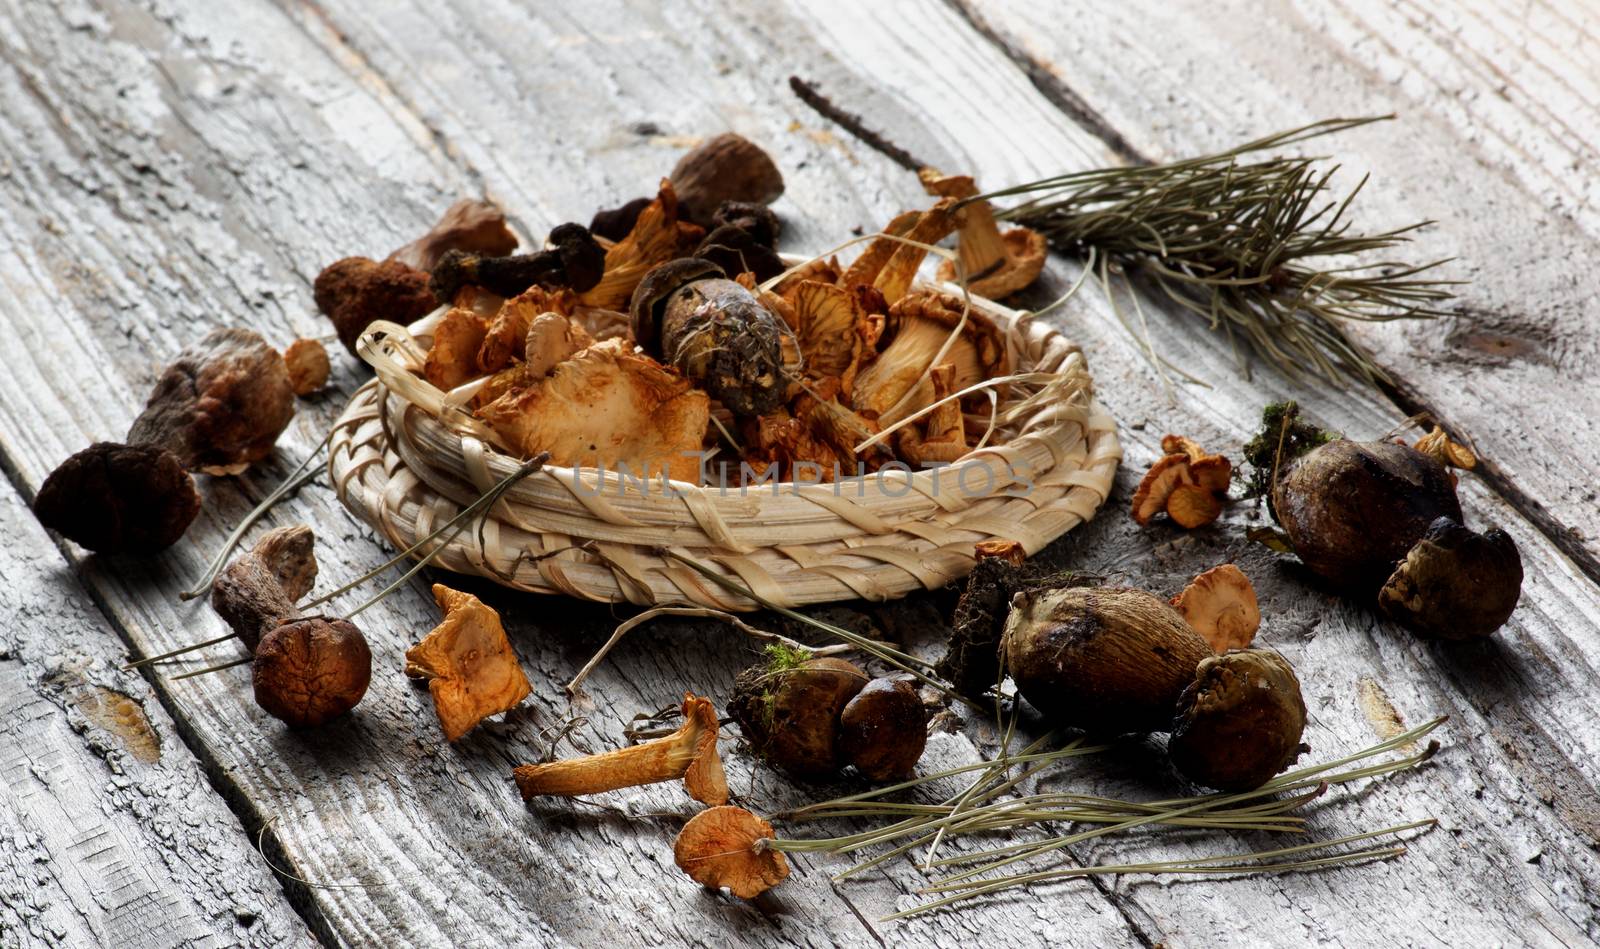 Arrangement of Forest Dried Mushrooms with Chanterelles, Porcini, Boletus Mushrooms and Pine Branches closeup Rustic Wooden background. Focus on Foreground